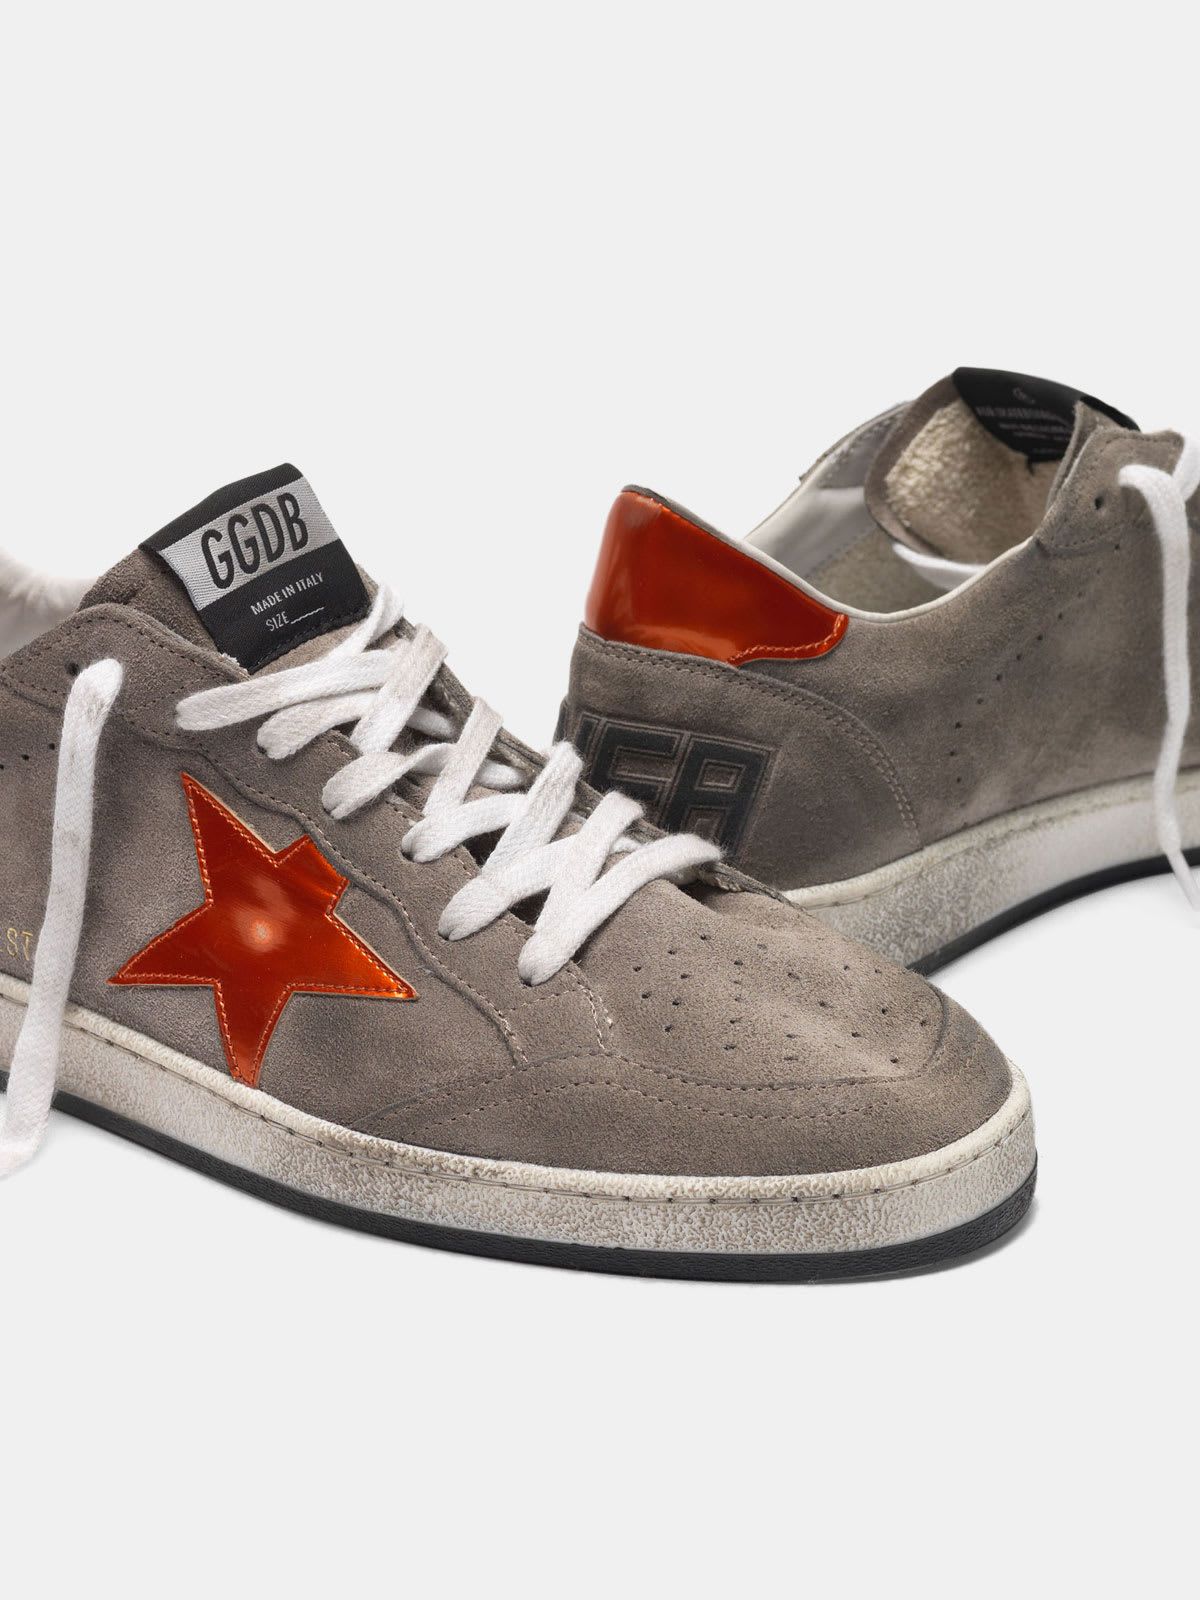 Ball Star sneakers in grey suede with orange star